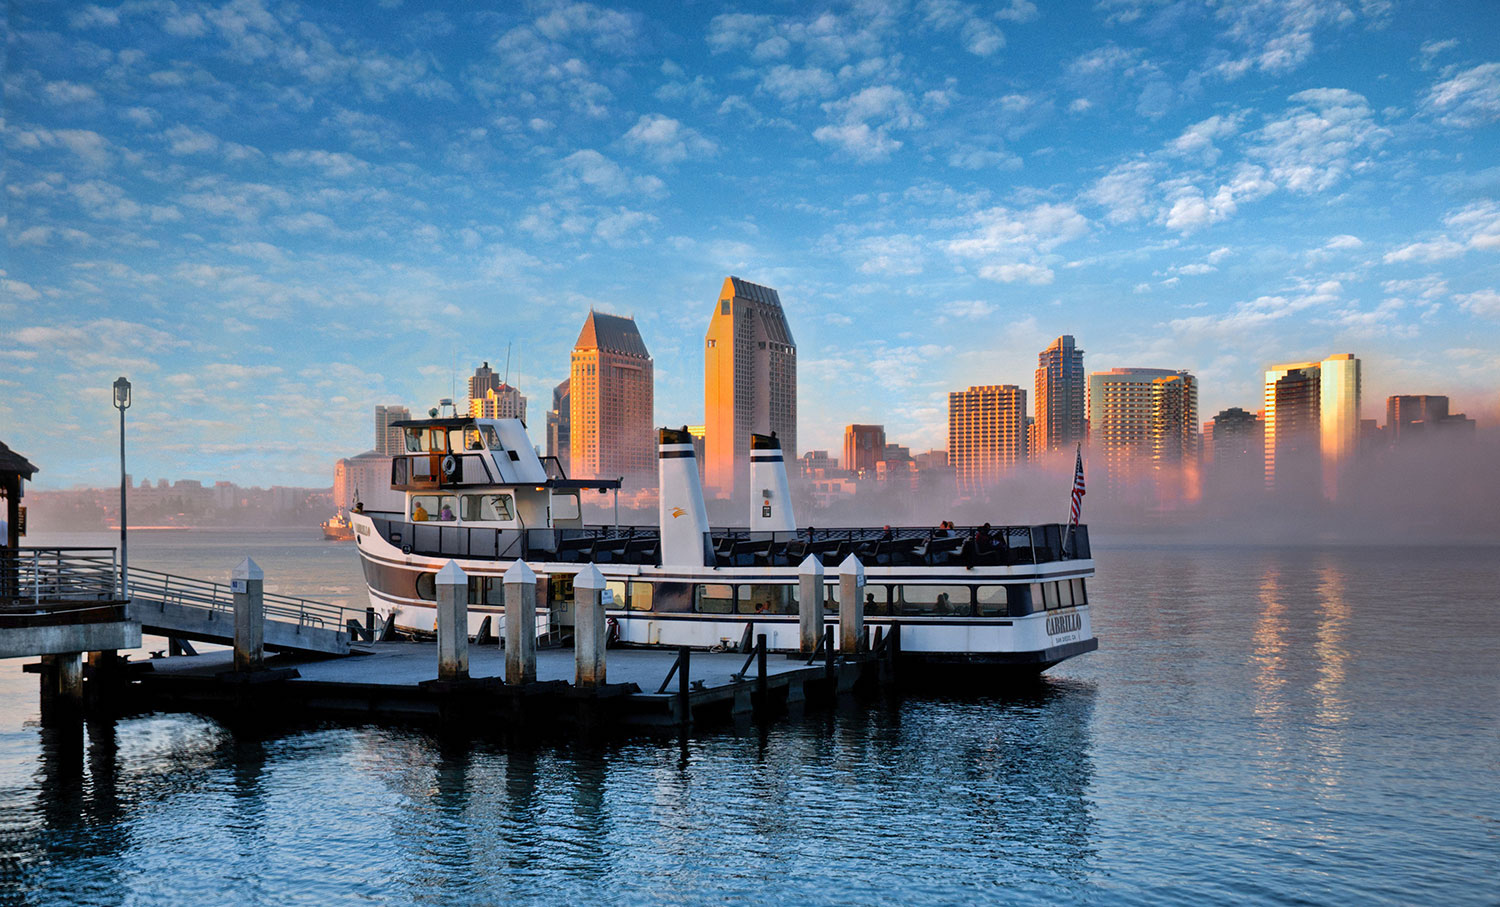 Things to do in San Diego that don't involve alcohol featuring the Coronado Ferry on the bay